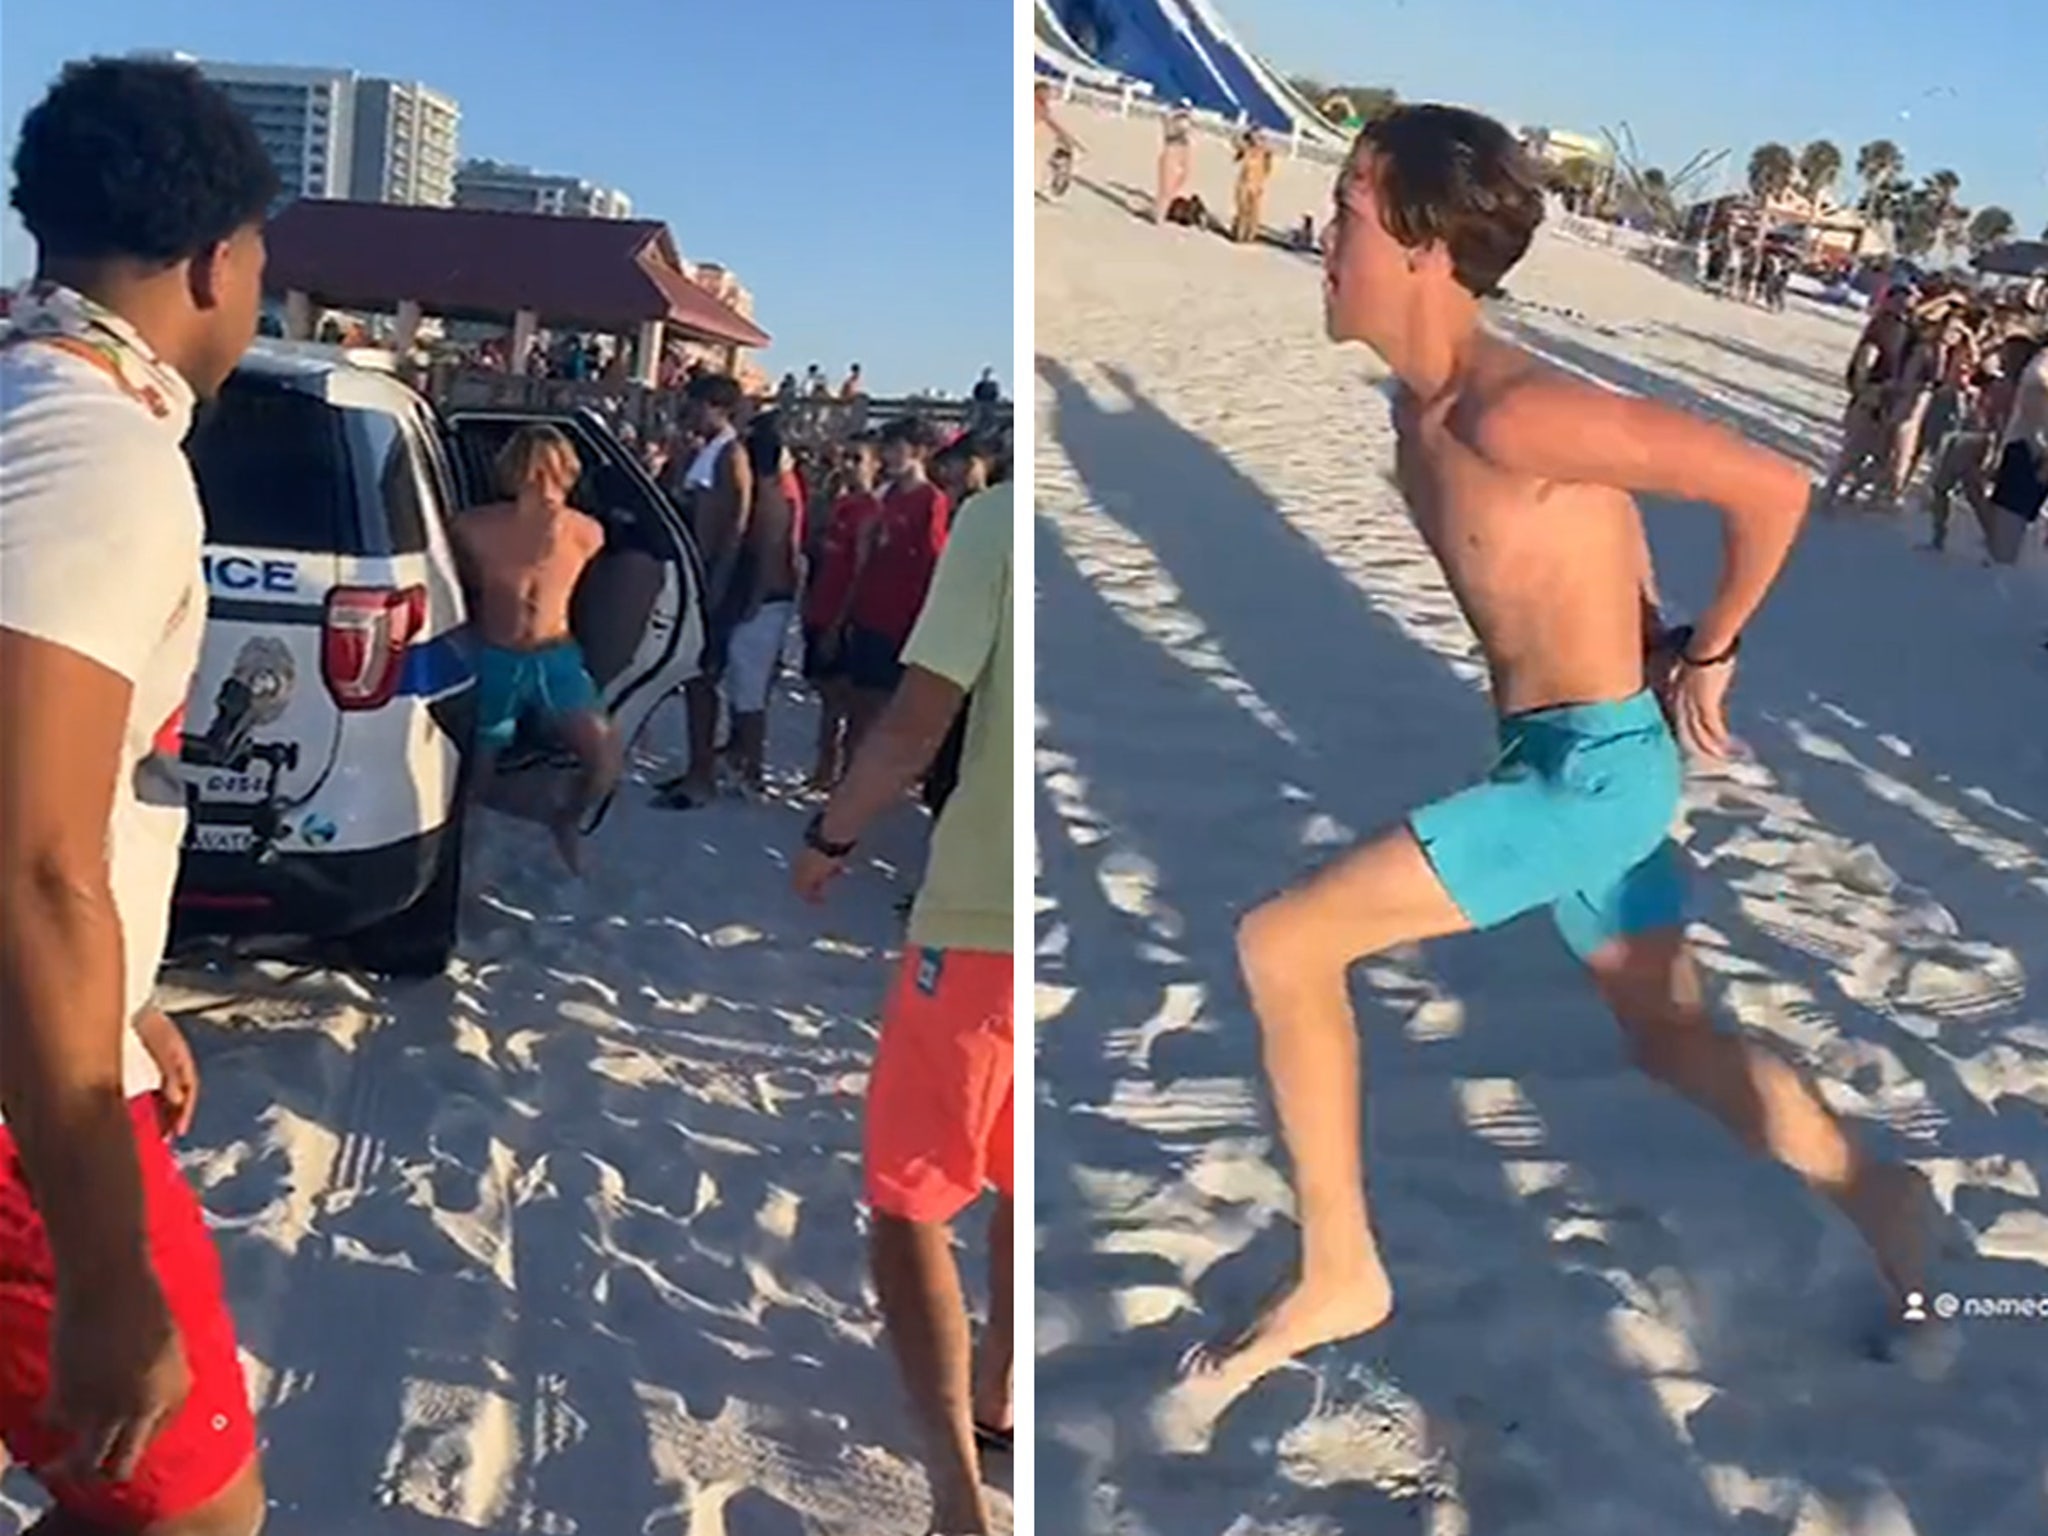 Spring Breaker Handcuffed But Flees From Cops Beach Crowd Cheers Him On